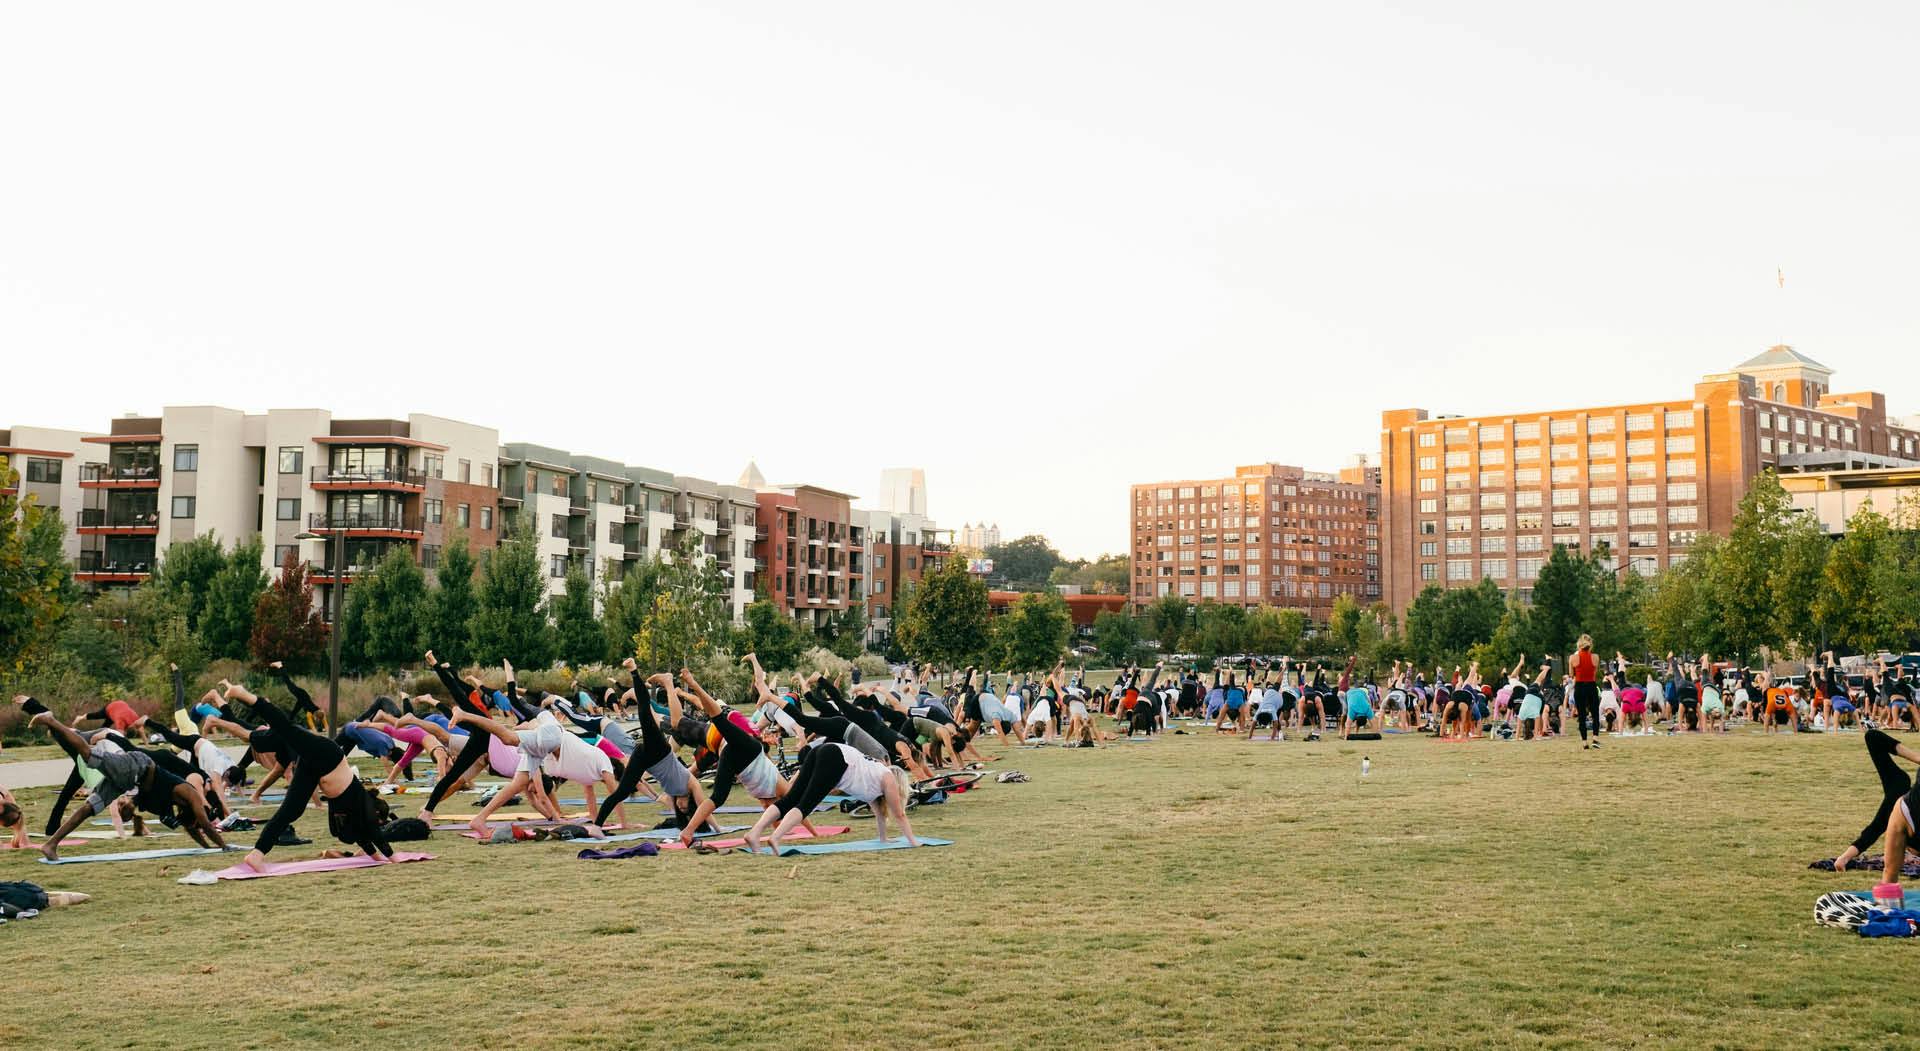 Hundreds of people participate in yoga on the great lawn at Historic Fourth Ward Park. (Photo Credit: Erin Sintos)